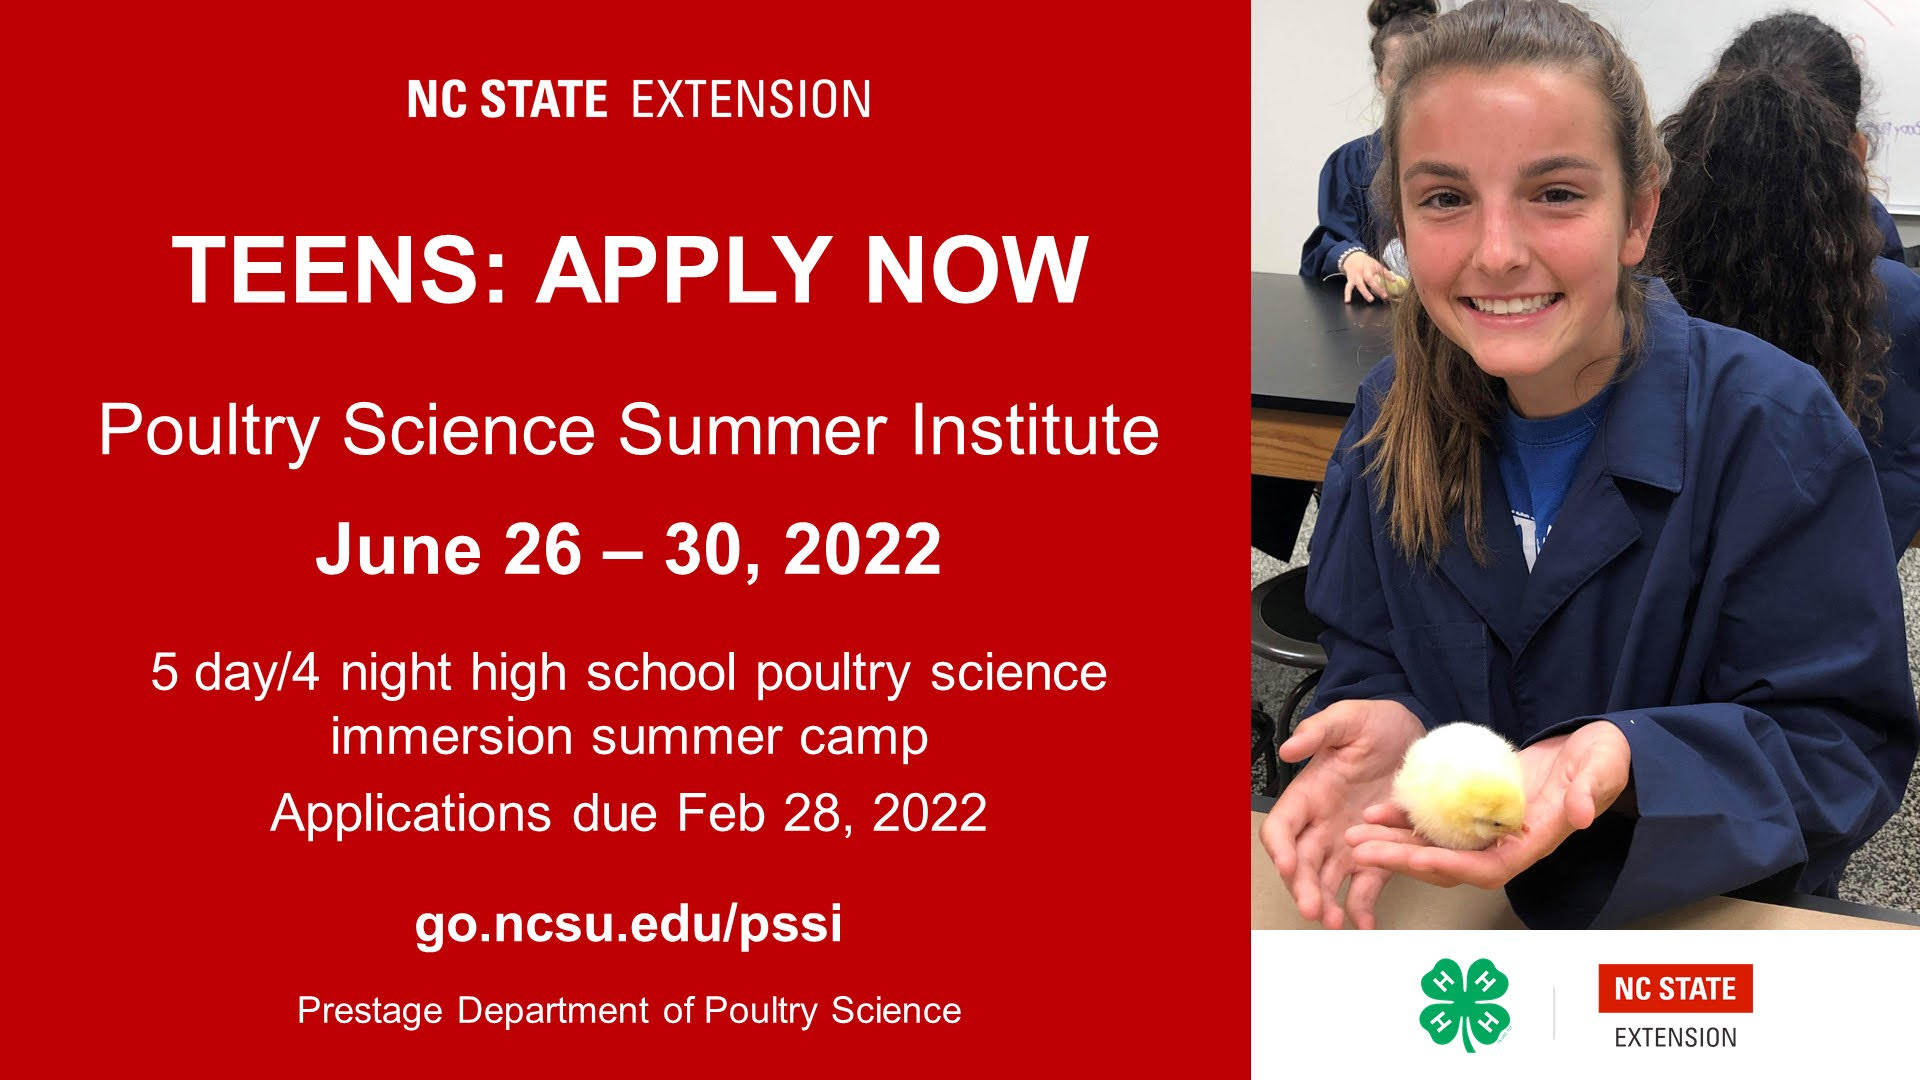 Flyer for Poultry Science Summer Institute with dates and webpage